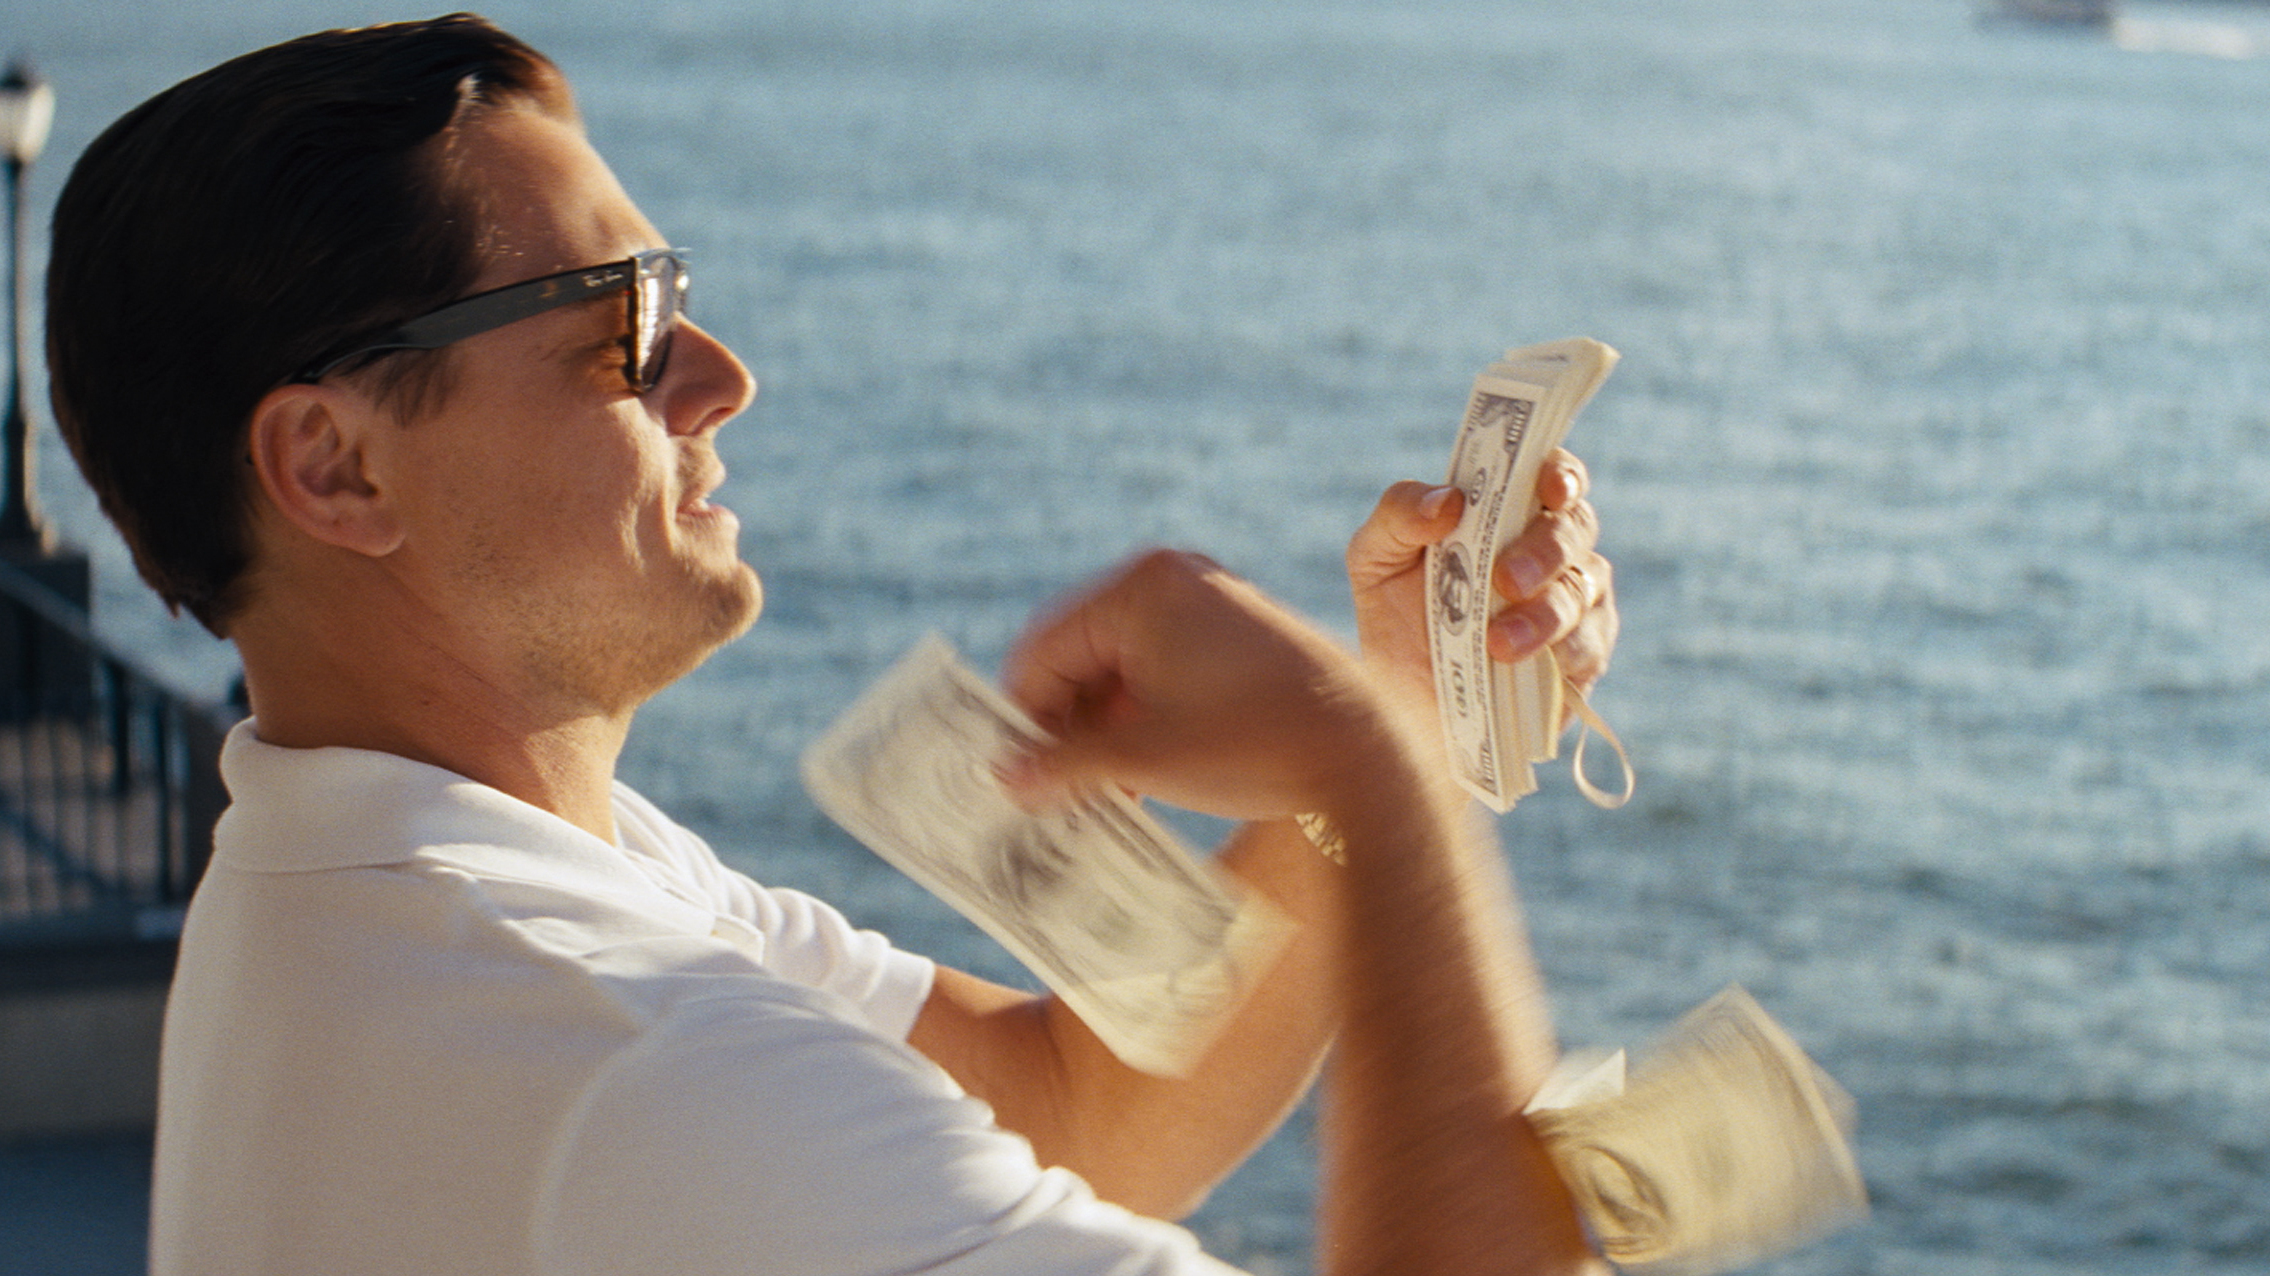 What Sunglasses Does Leonardo Dicaprio Wear In The Wolf of Wall Street?